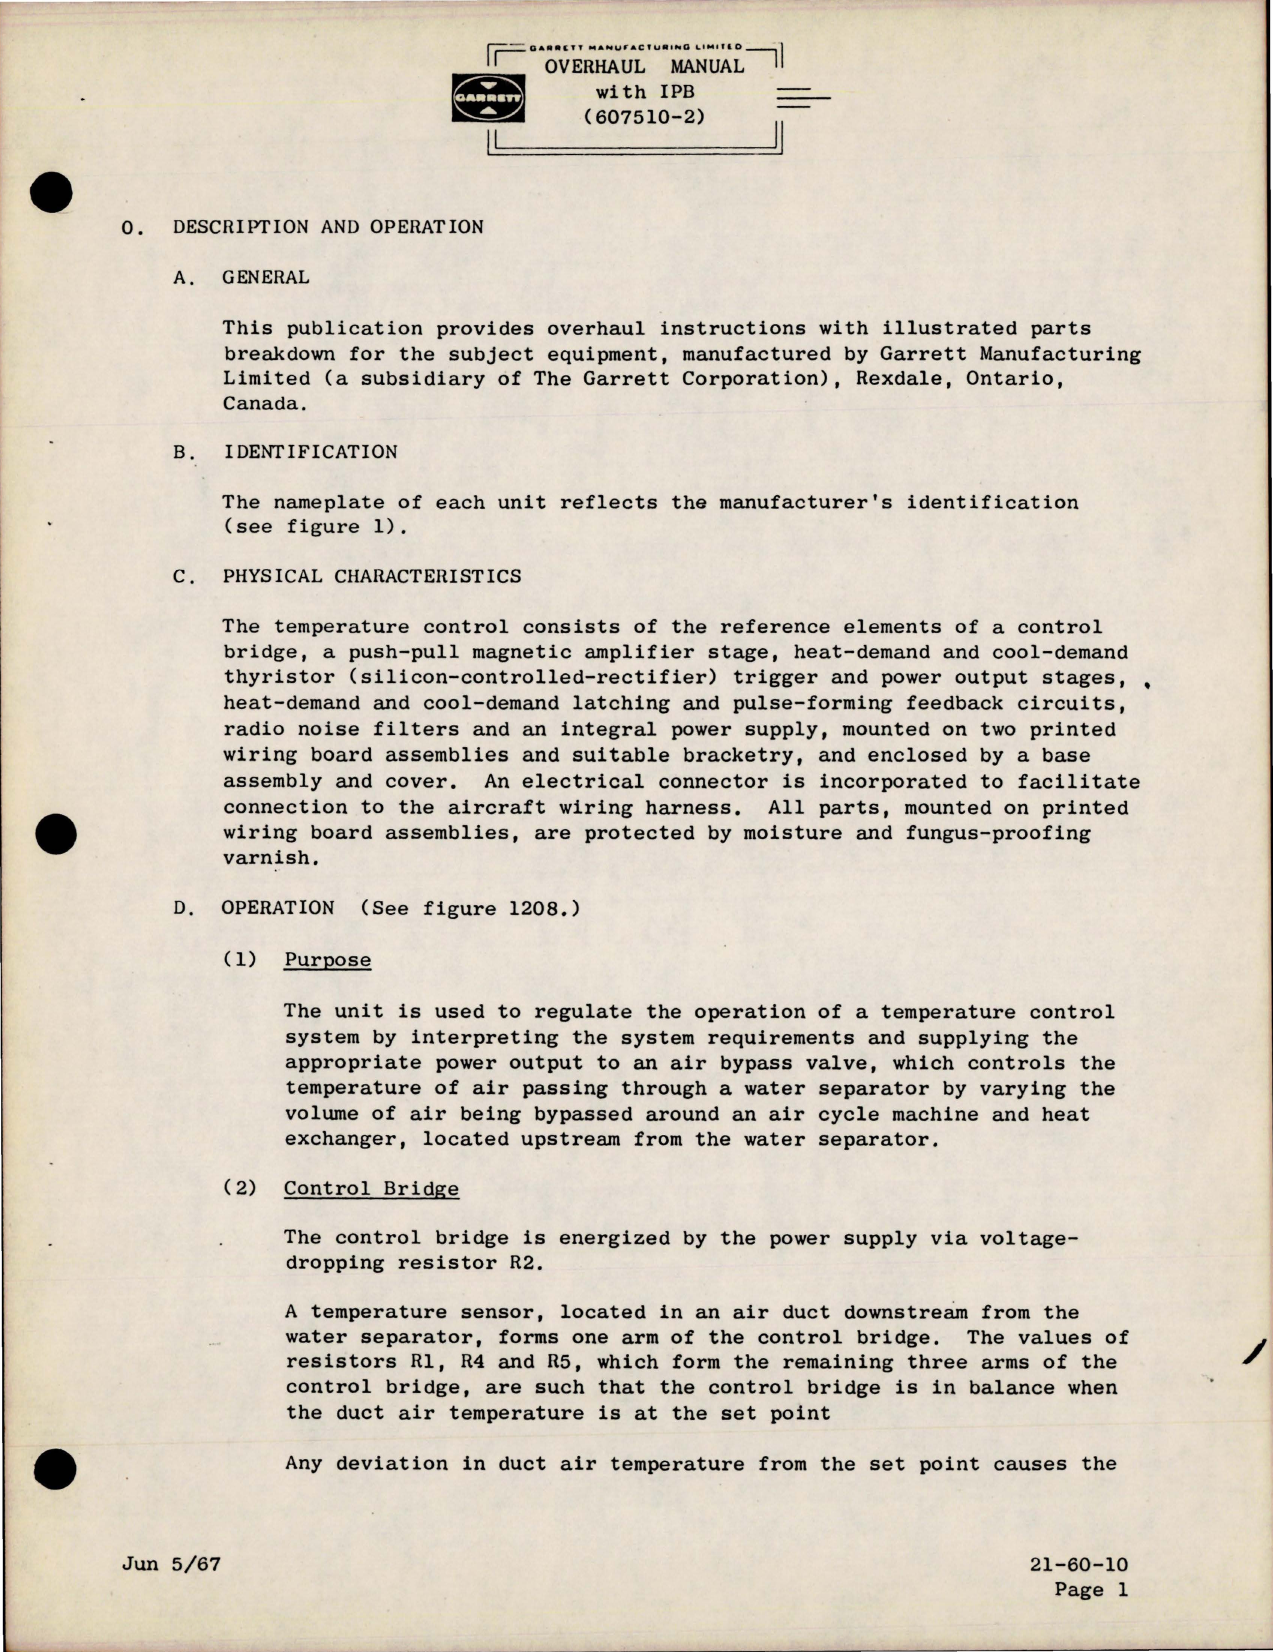 Sample page 9 from AirCorps Library document: Overhaul Instructions with Parts Breakdown for Temperature Control - 607510-2 Series 1 and 2